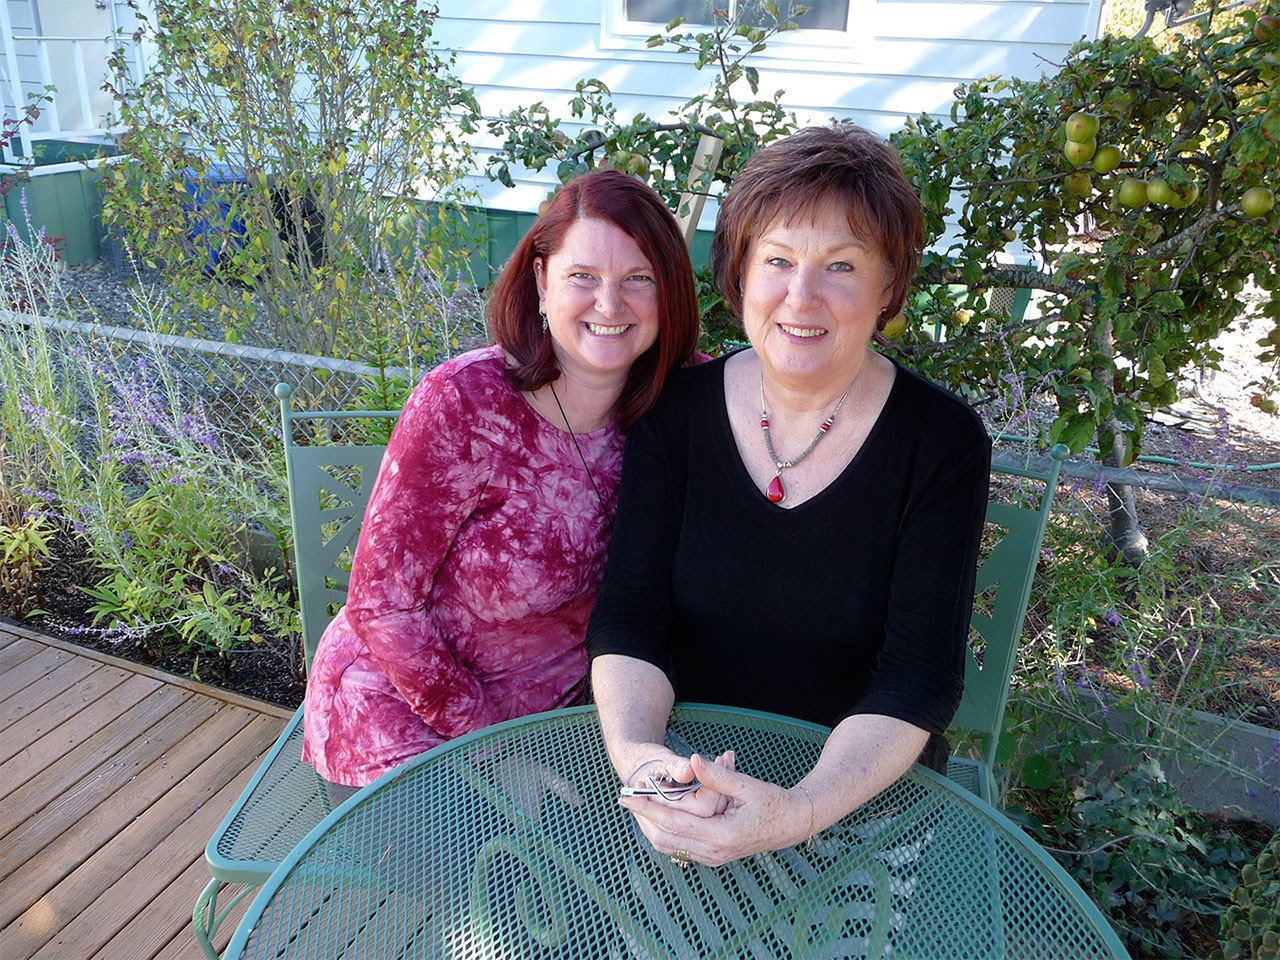 One of Michele and Judy’s favorites places to relax is their backyard patio in Sequim. (Patricia Morrison Coate/Olympic Peninsula News Group)